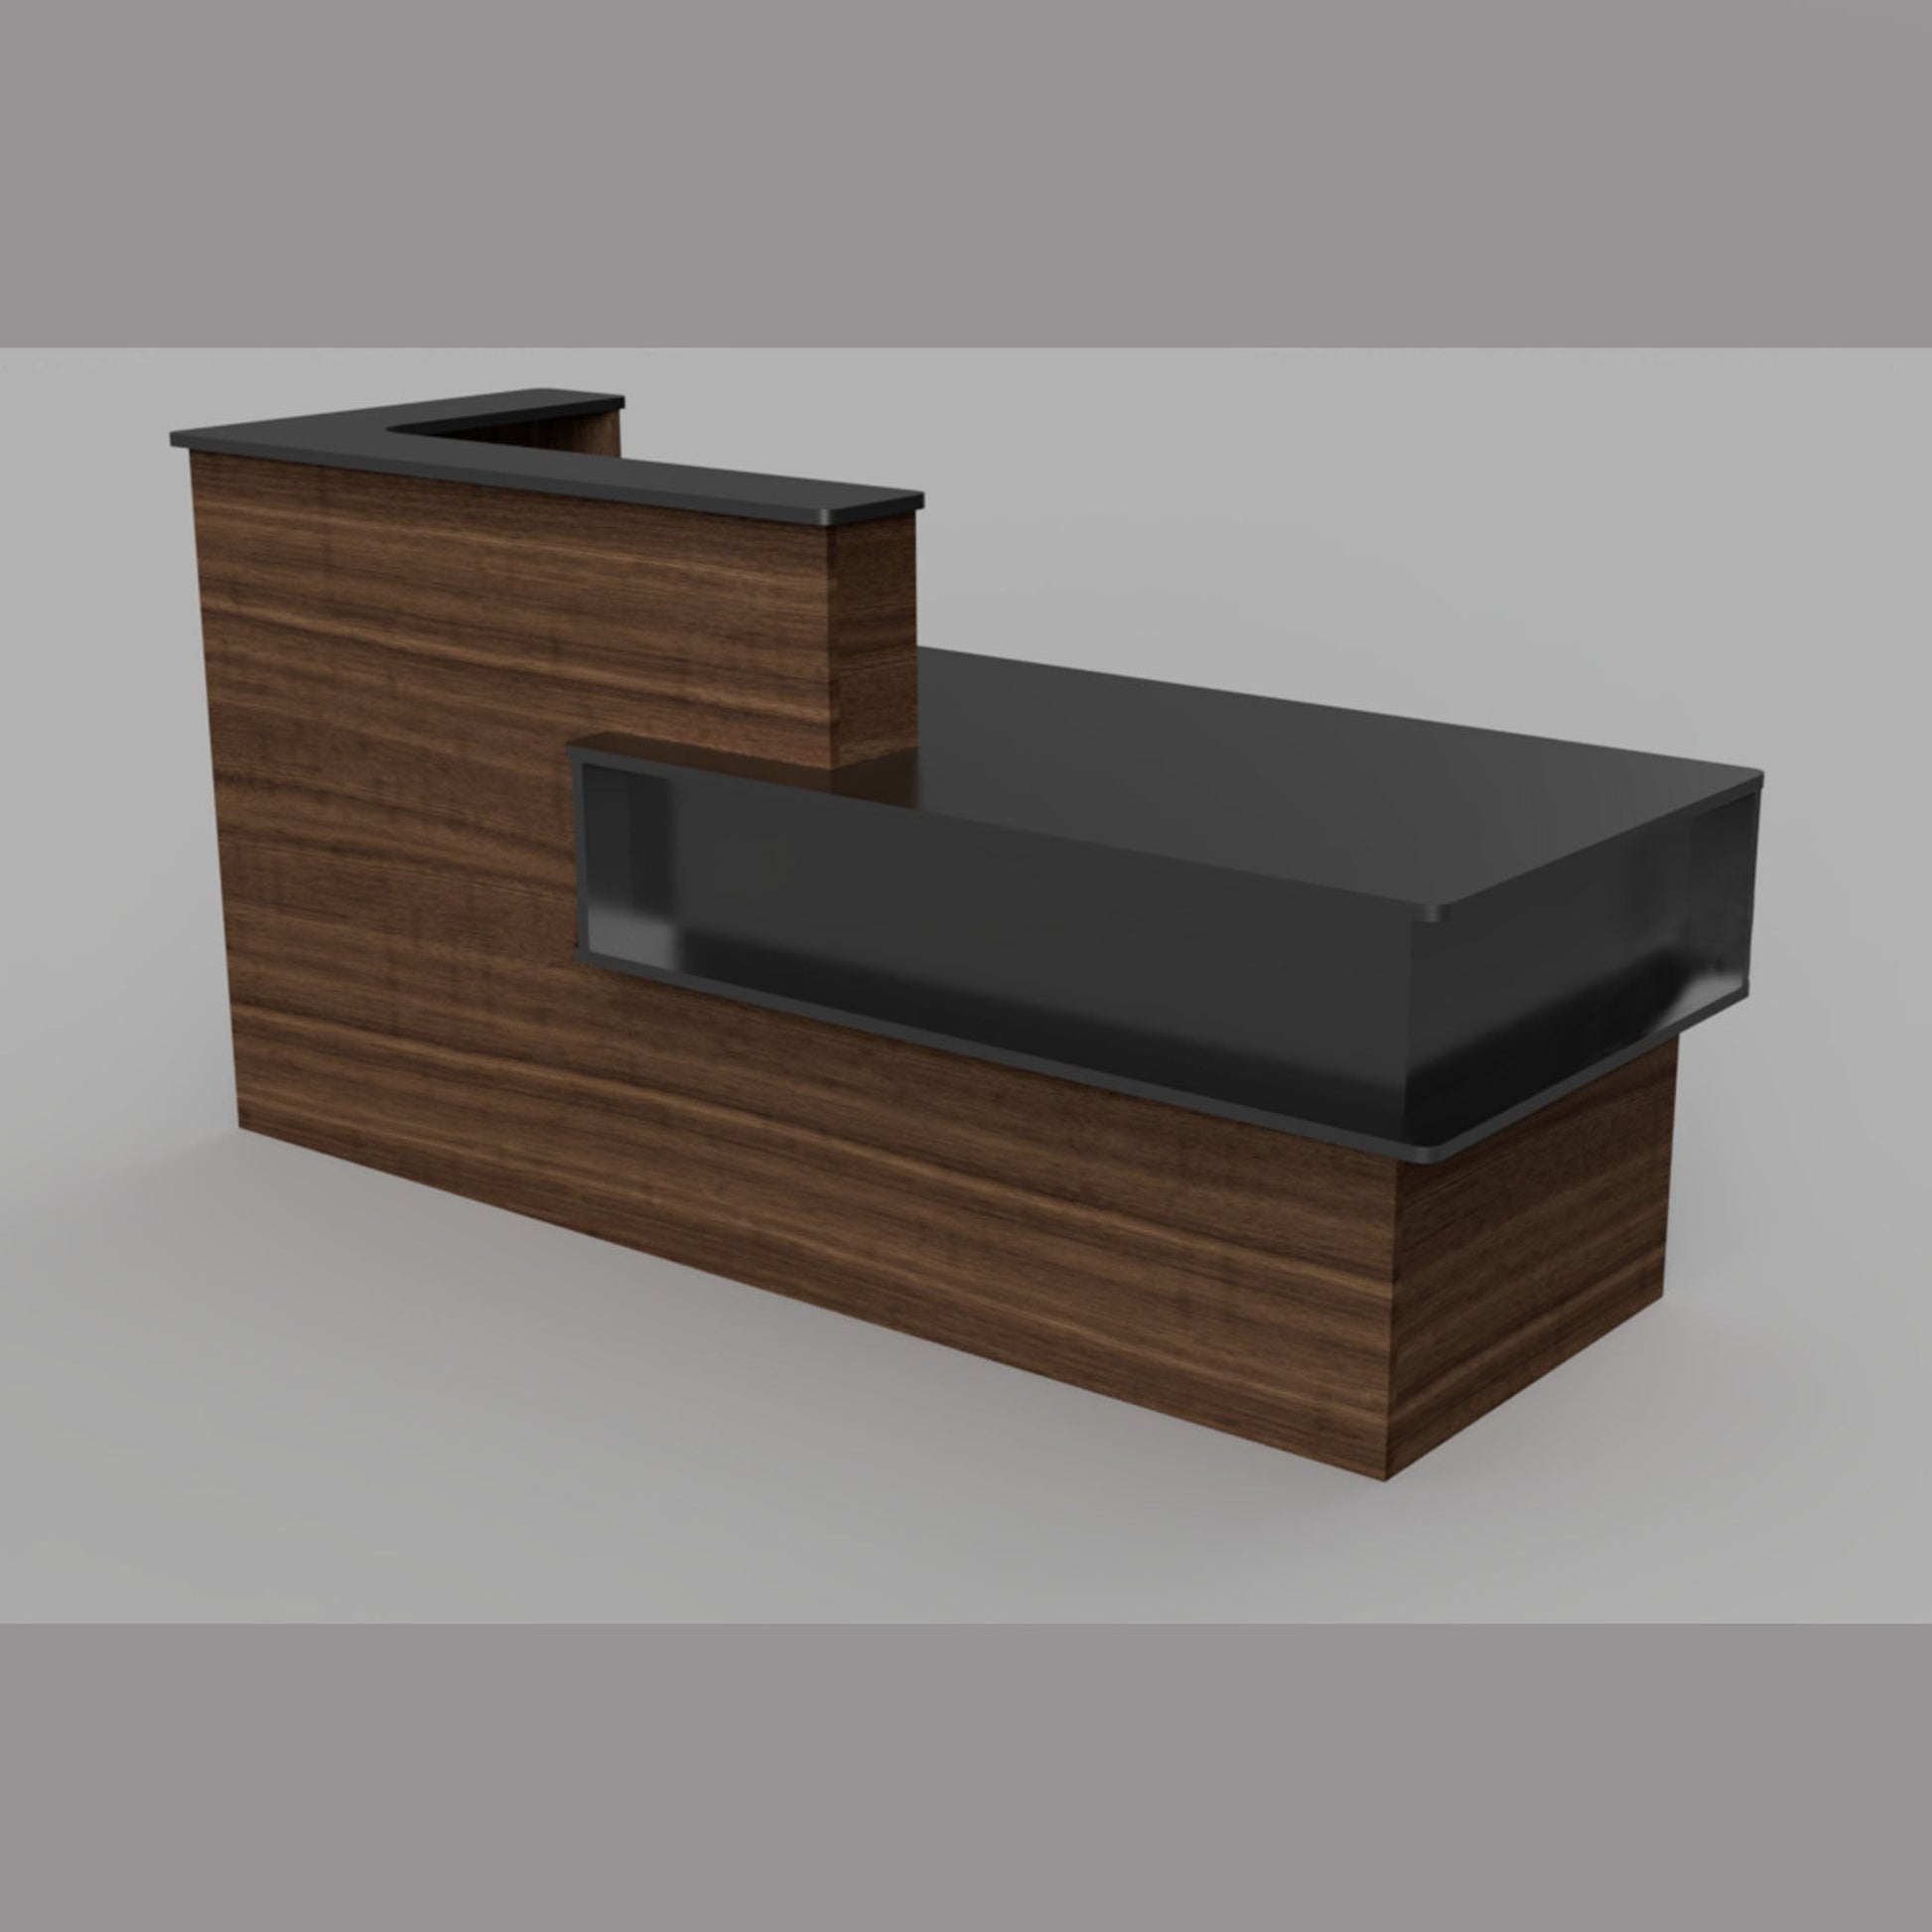 Modern Reception Desk, sales counter, office desk, or front desk. This modern desk is perfect for any office or retail store.